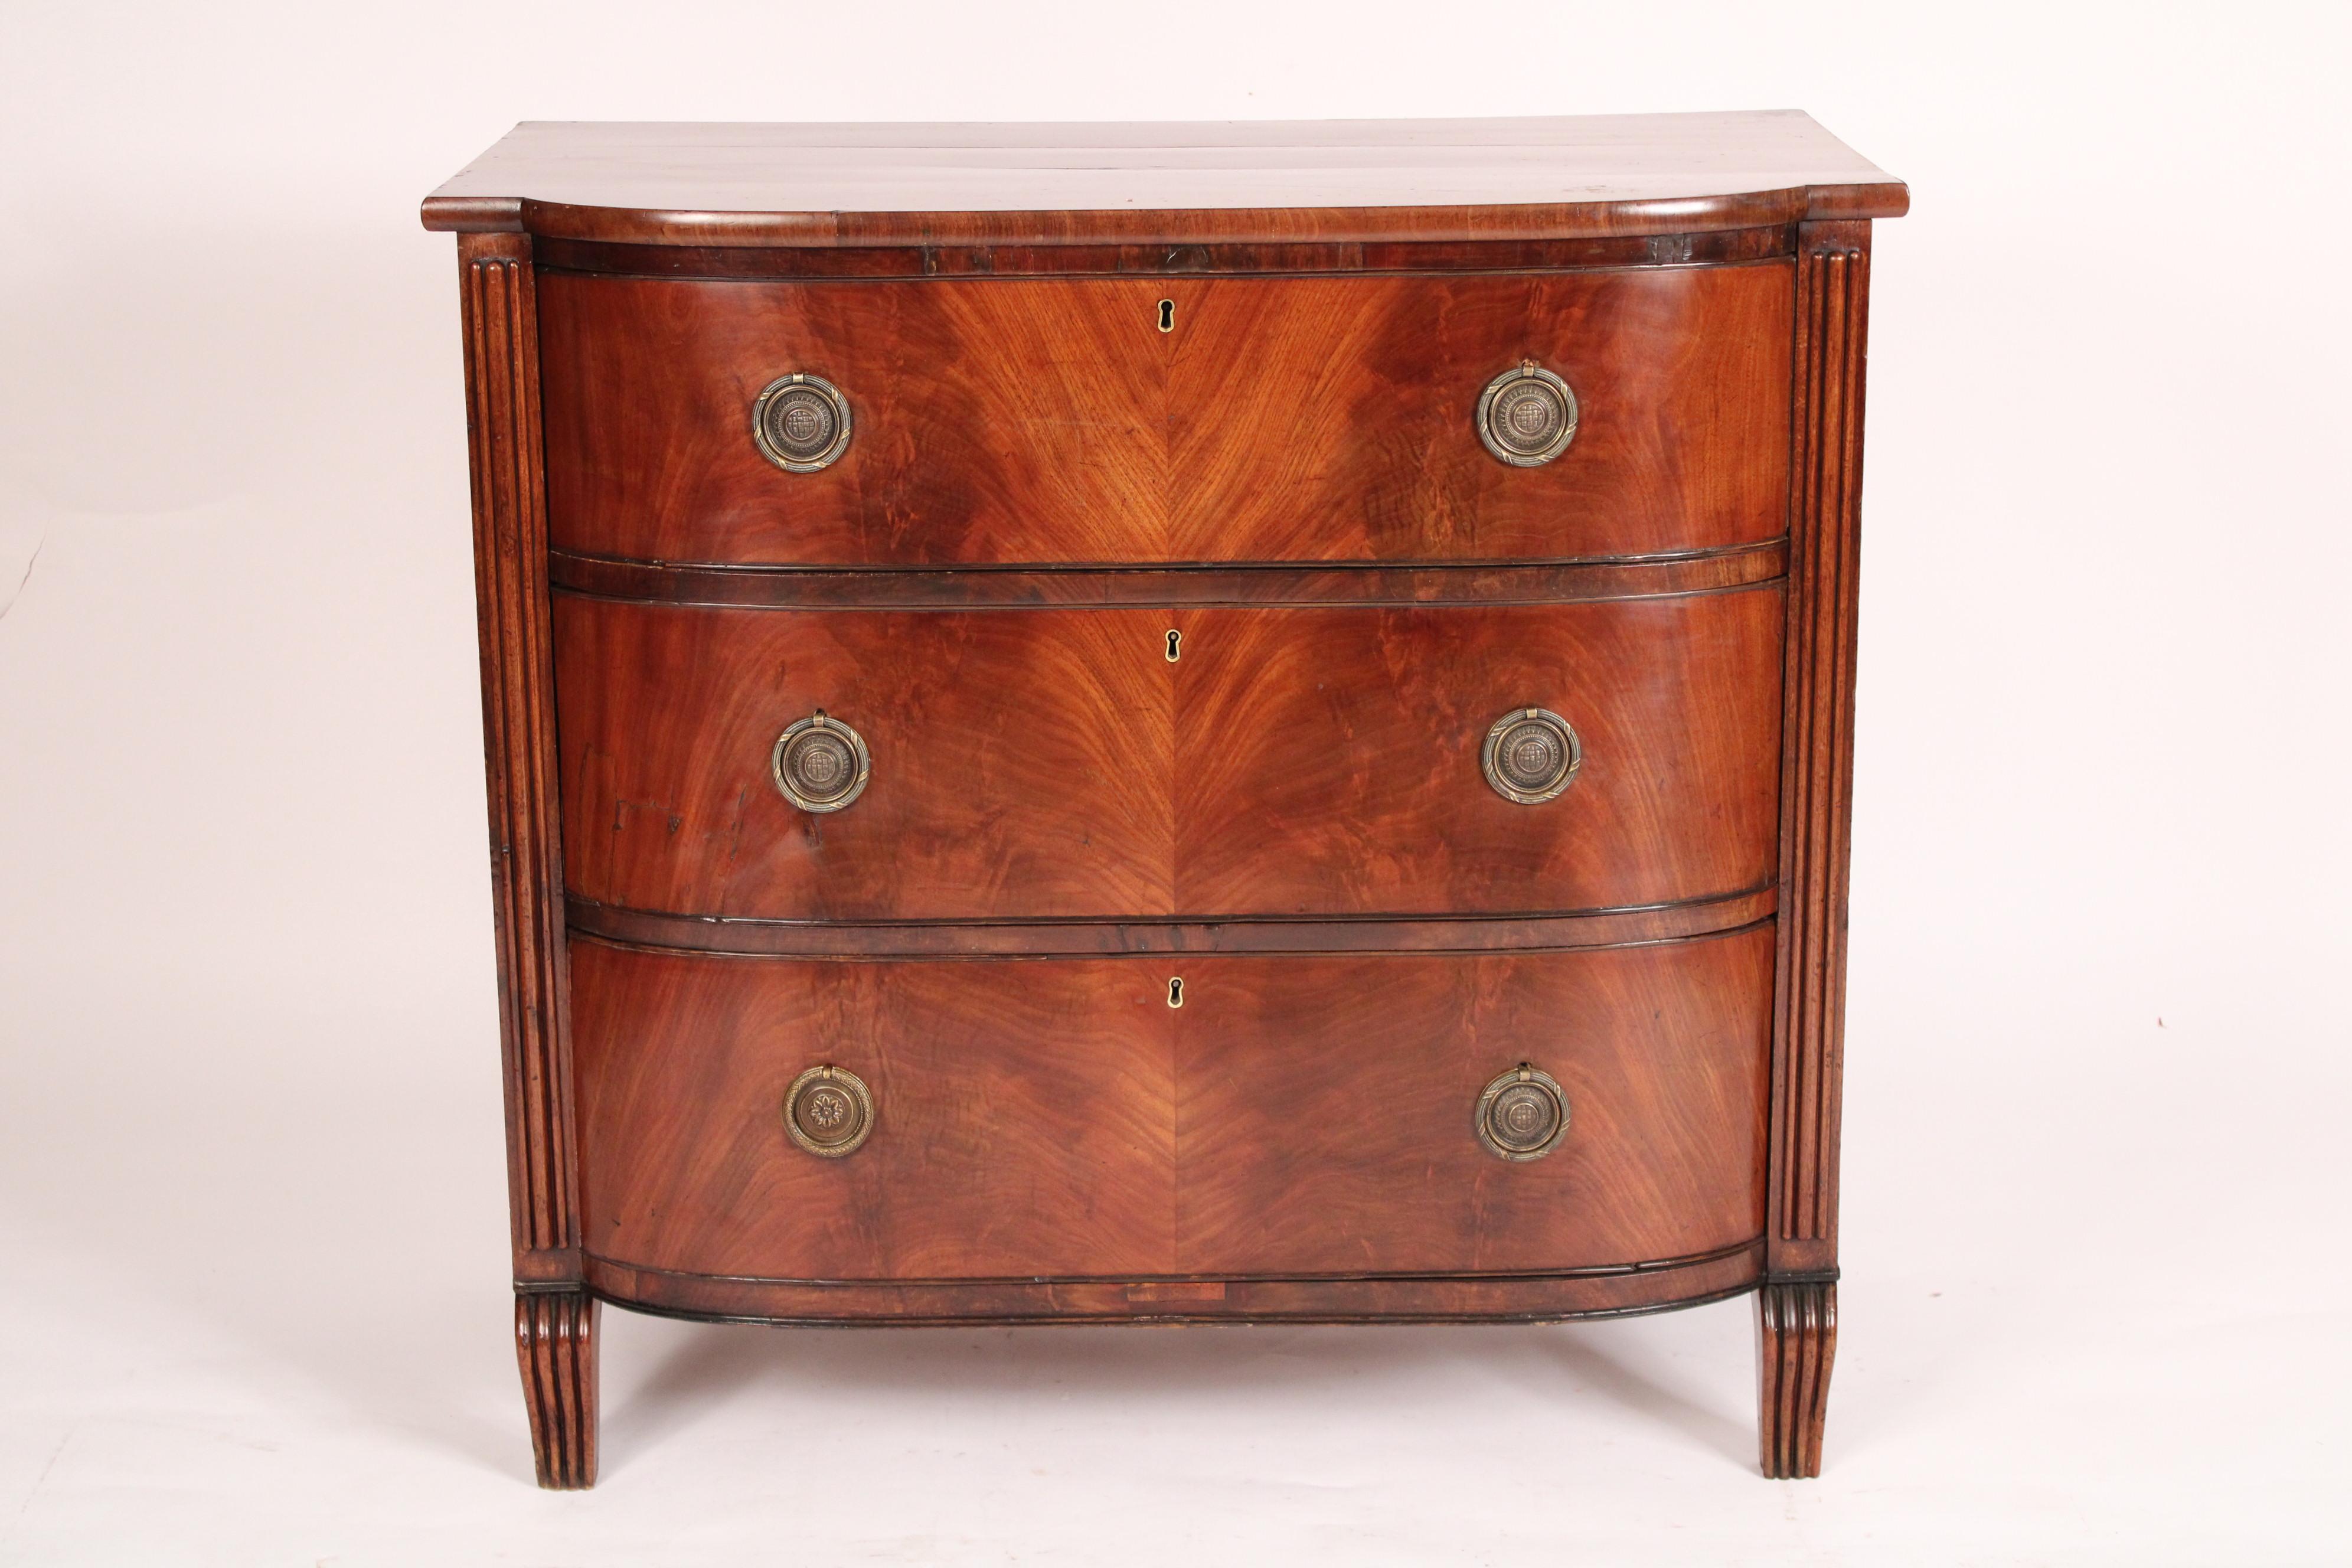 English regency mahogany bow front chest of drawers, circa 1810. With a single board top, 3 flame mahogany drawers with brass hardware, resting on slight serpentine shaped feet.